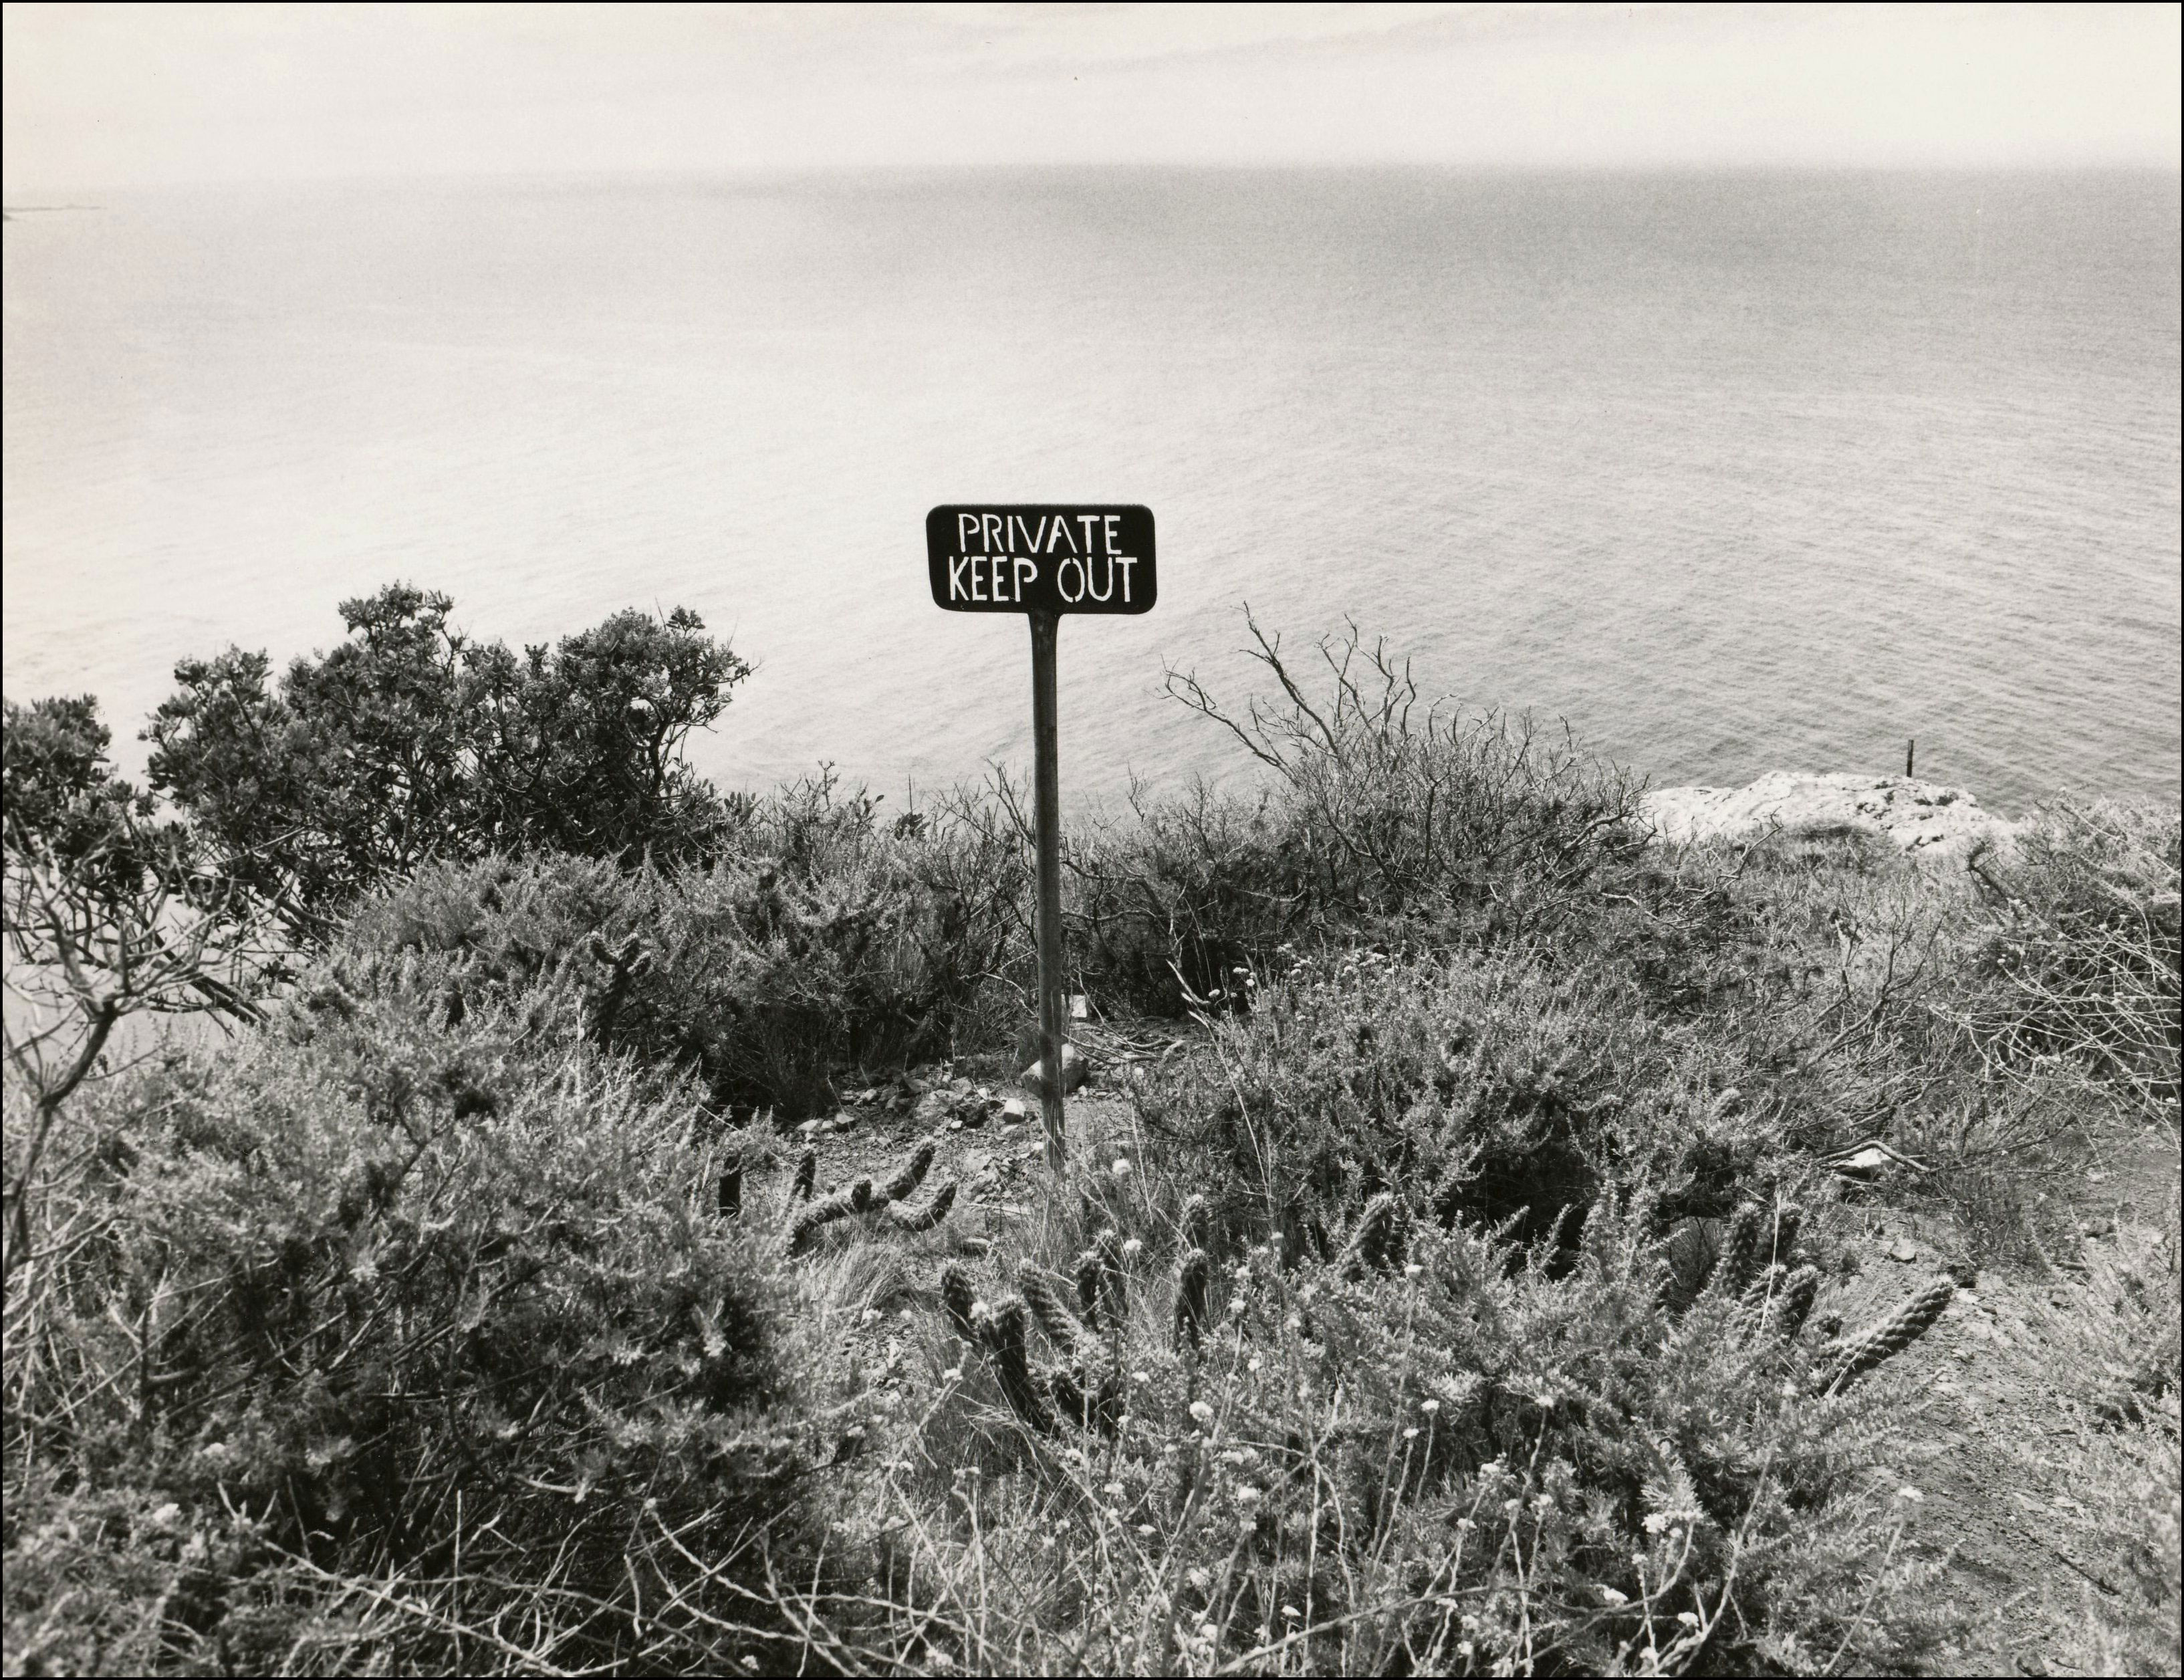 Small wooden private property sign on the edge of the coastline.